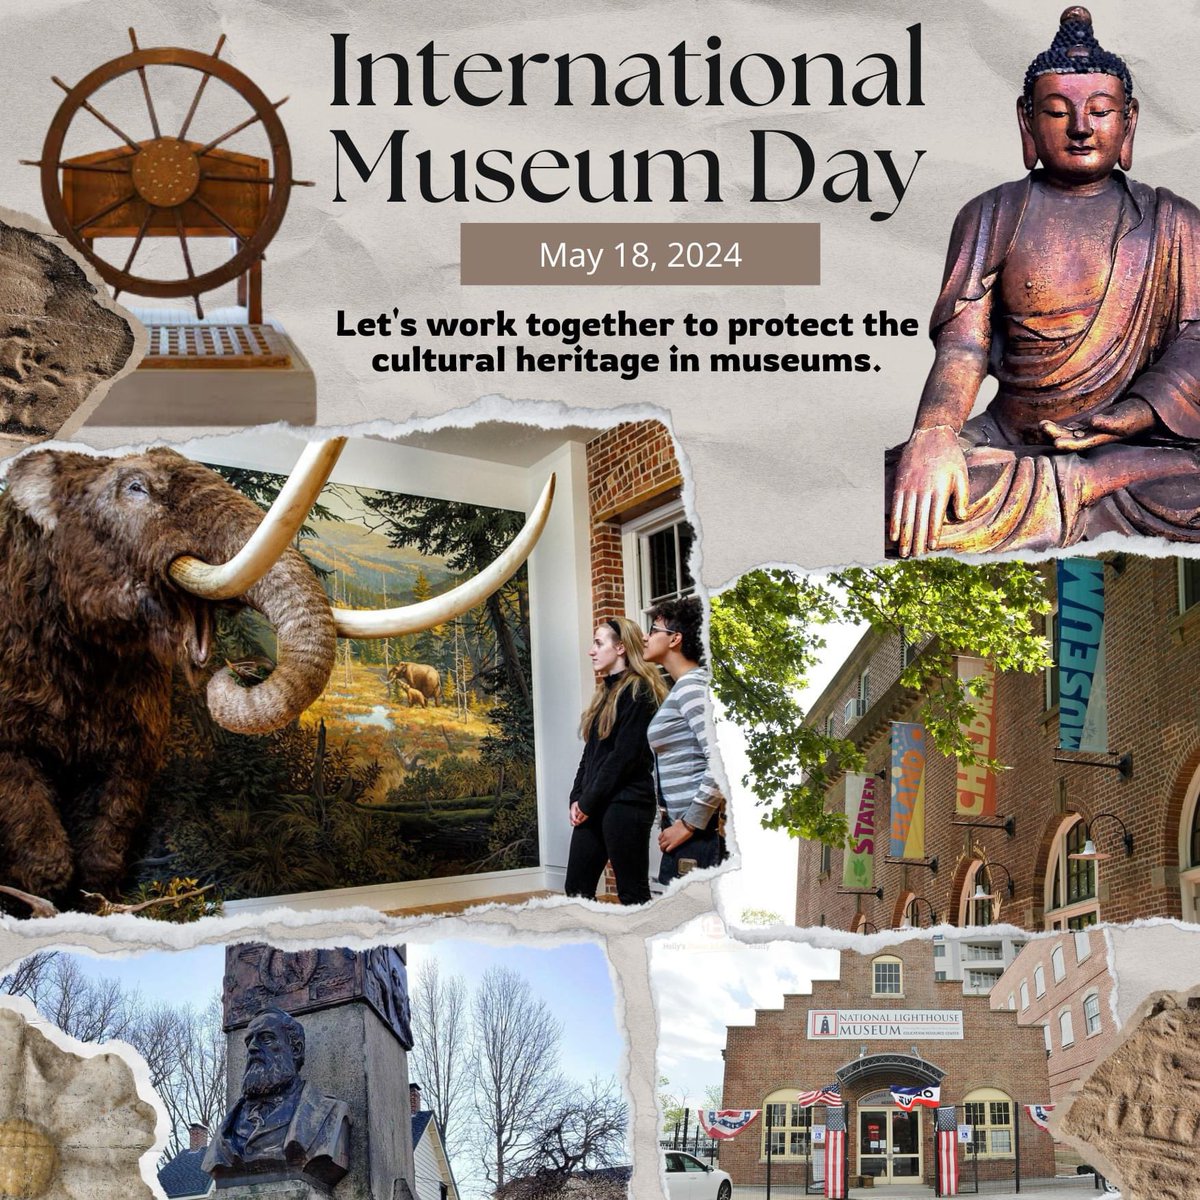 Today is together we must work together to protect our cultural treasures! @SIMuseum @SIKidsMuseum_ @SandyGroundHS @TibetanMuseum Visit your local museum! @CommishCumbo